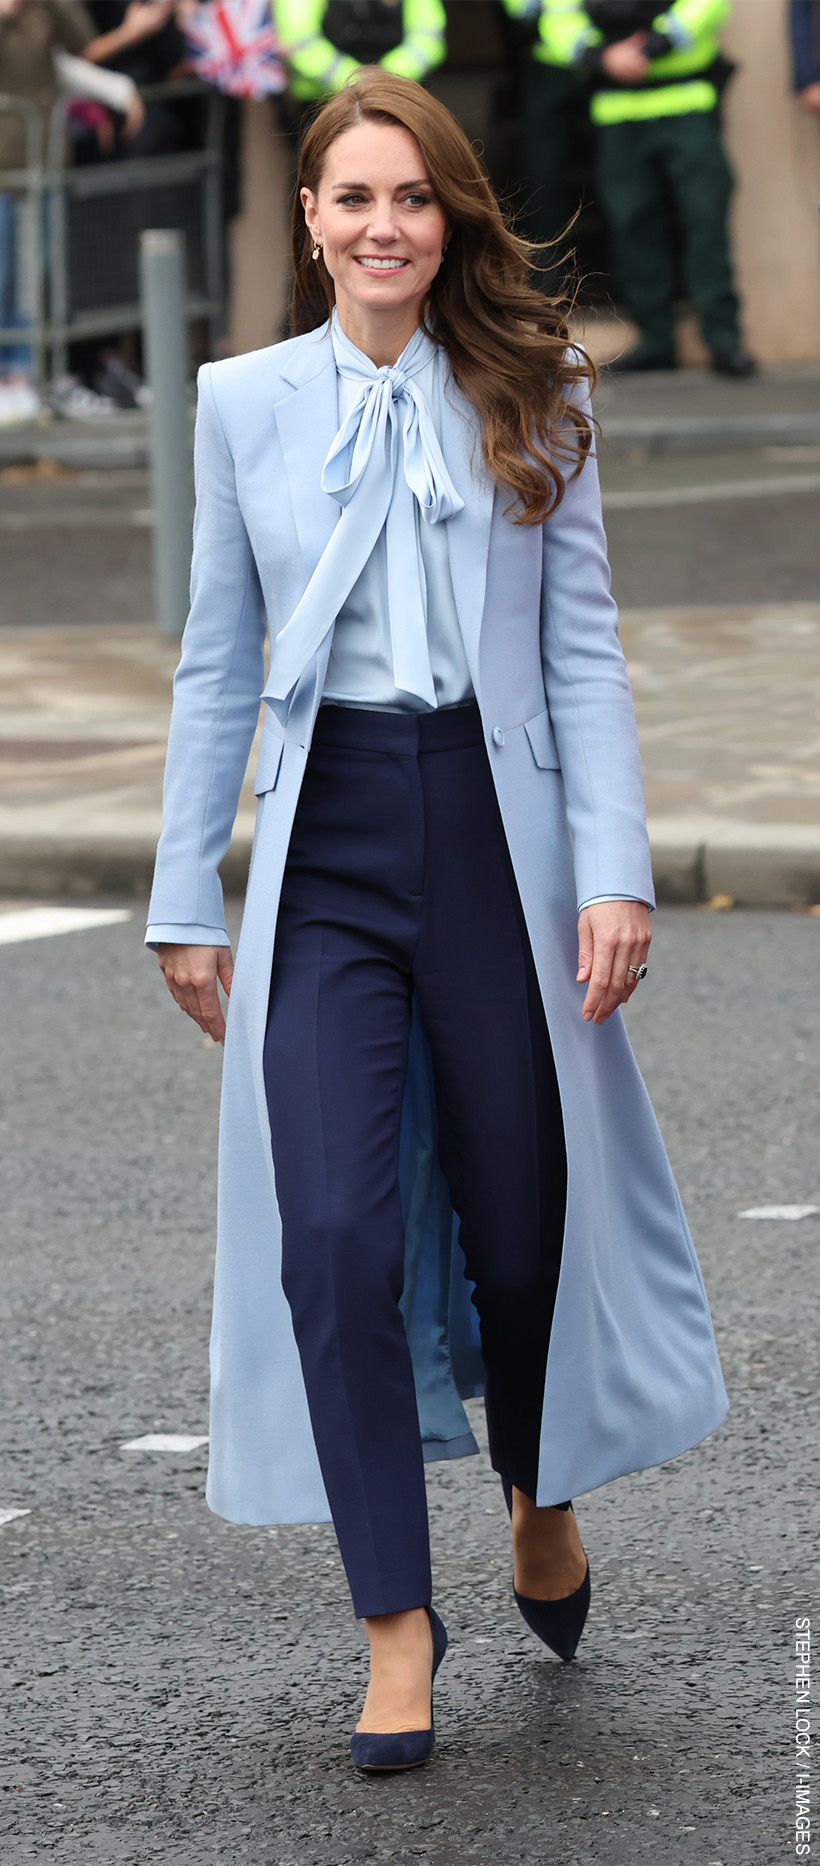 Kate Middleton, Princess of Wales, wearing a tonal blue outfit visiting Northern Ireland.